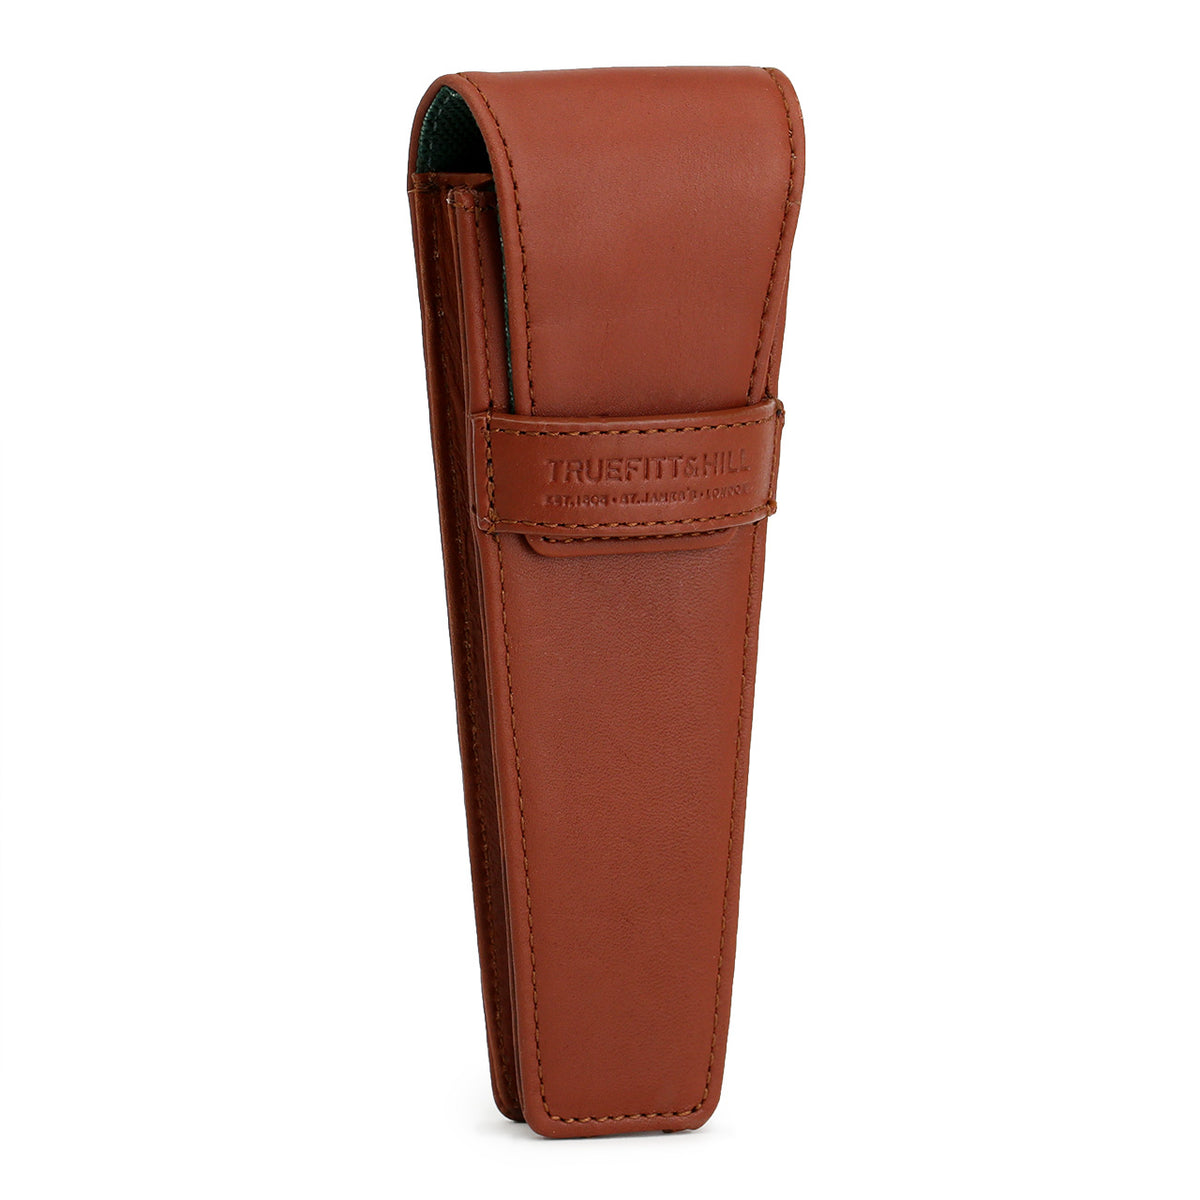 Tan Leather razor case by Truefitt and Hill, standing three-quarter angle